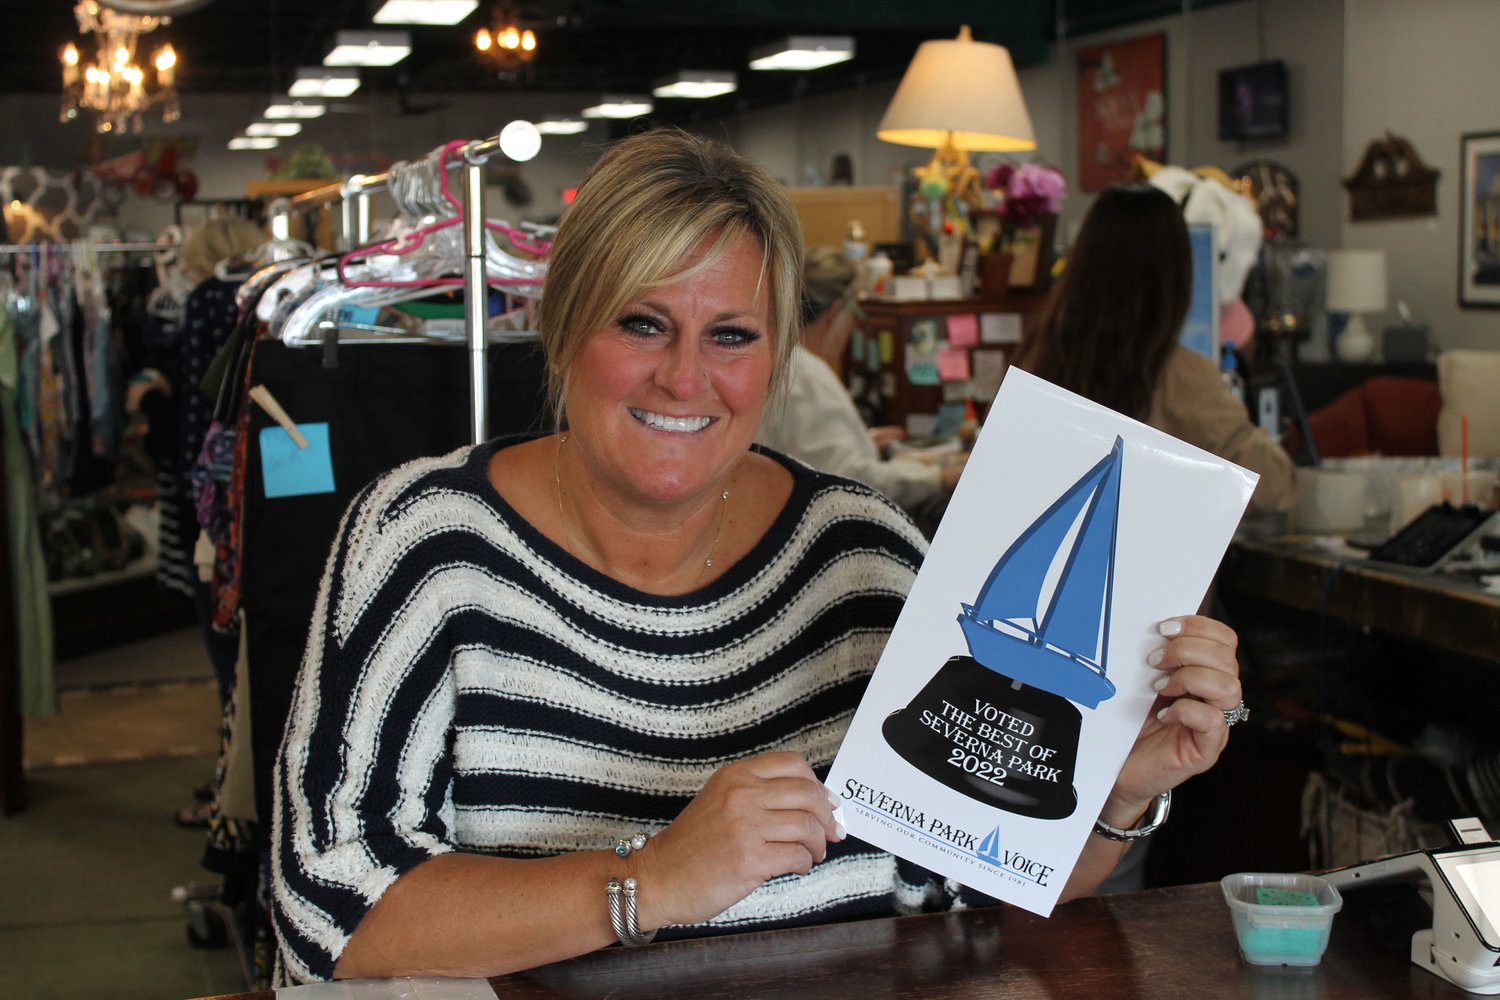 Stacey Cassidy was proud that readers chose Savvy Consignment as the Best Consignment Shop in the 2022 Best of Severna Park contest.